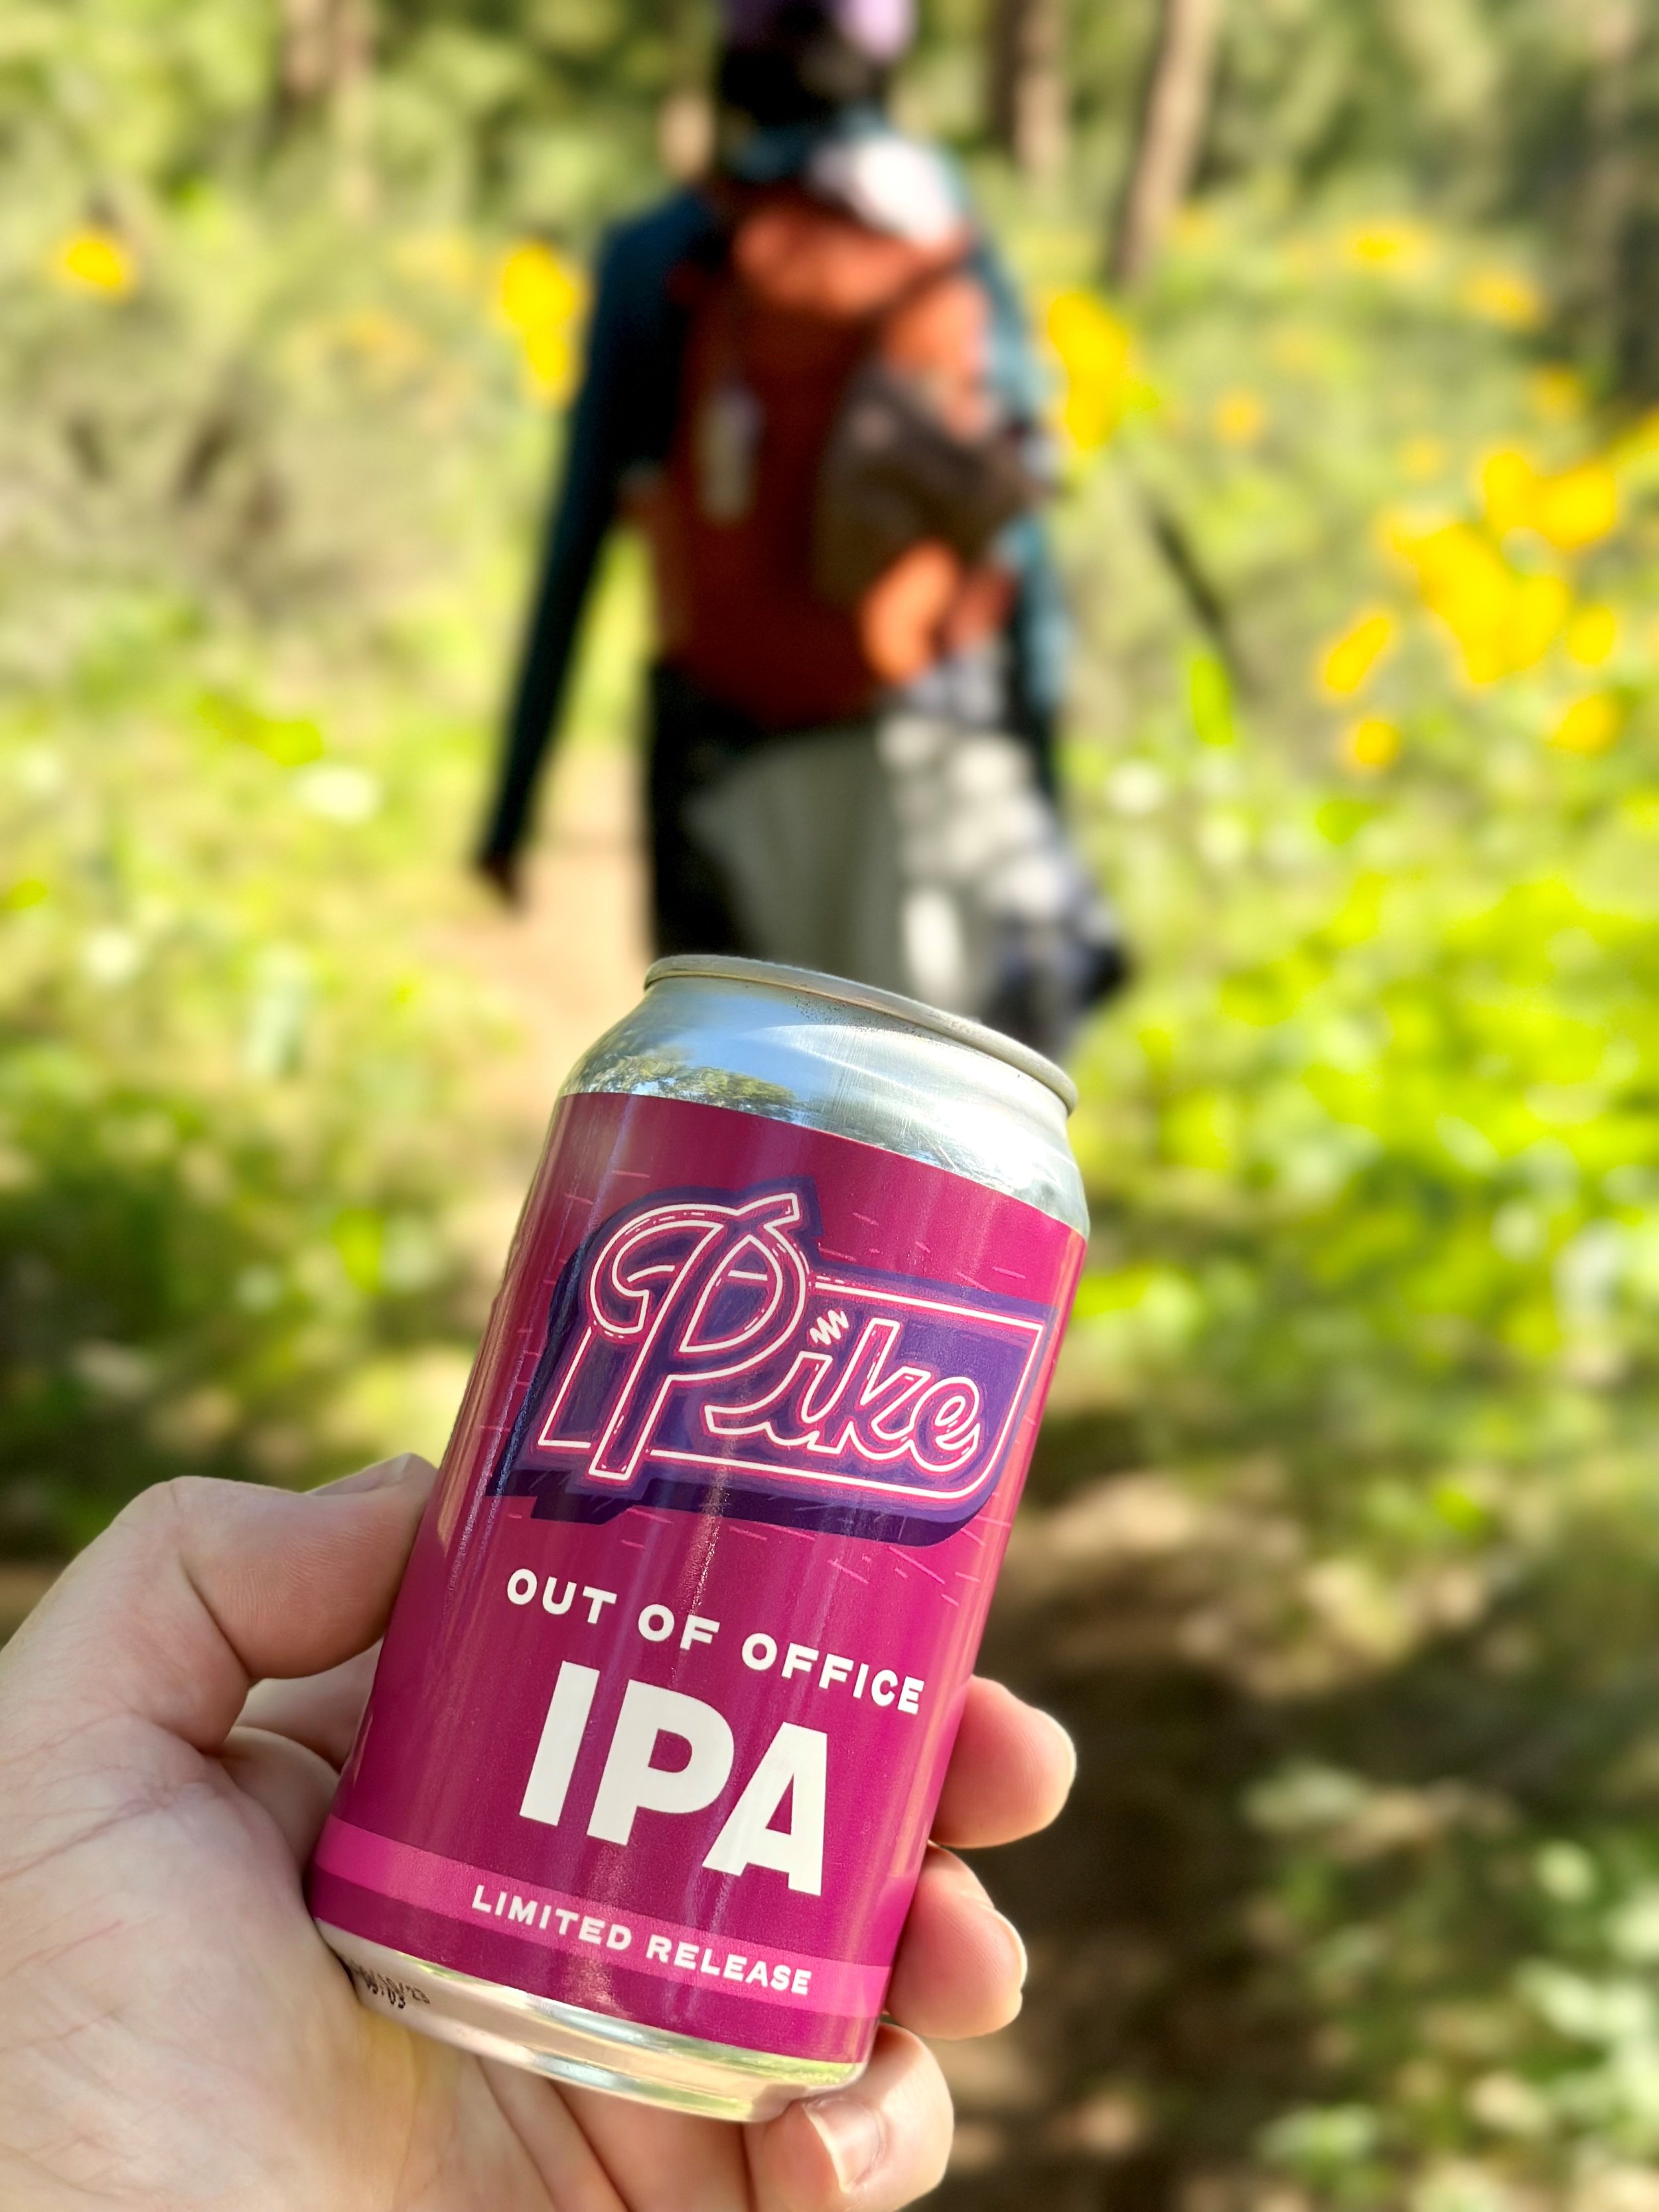 Out of Office IPA.jpg